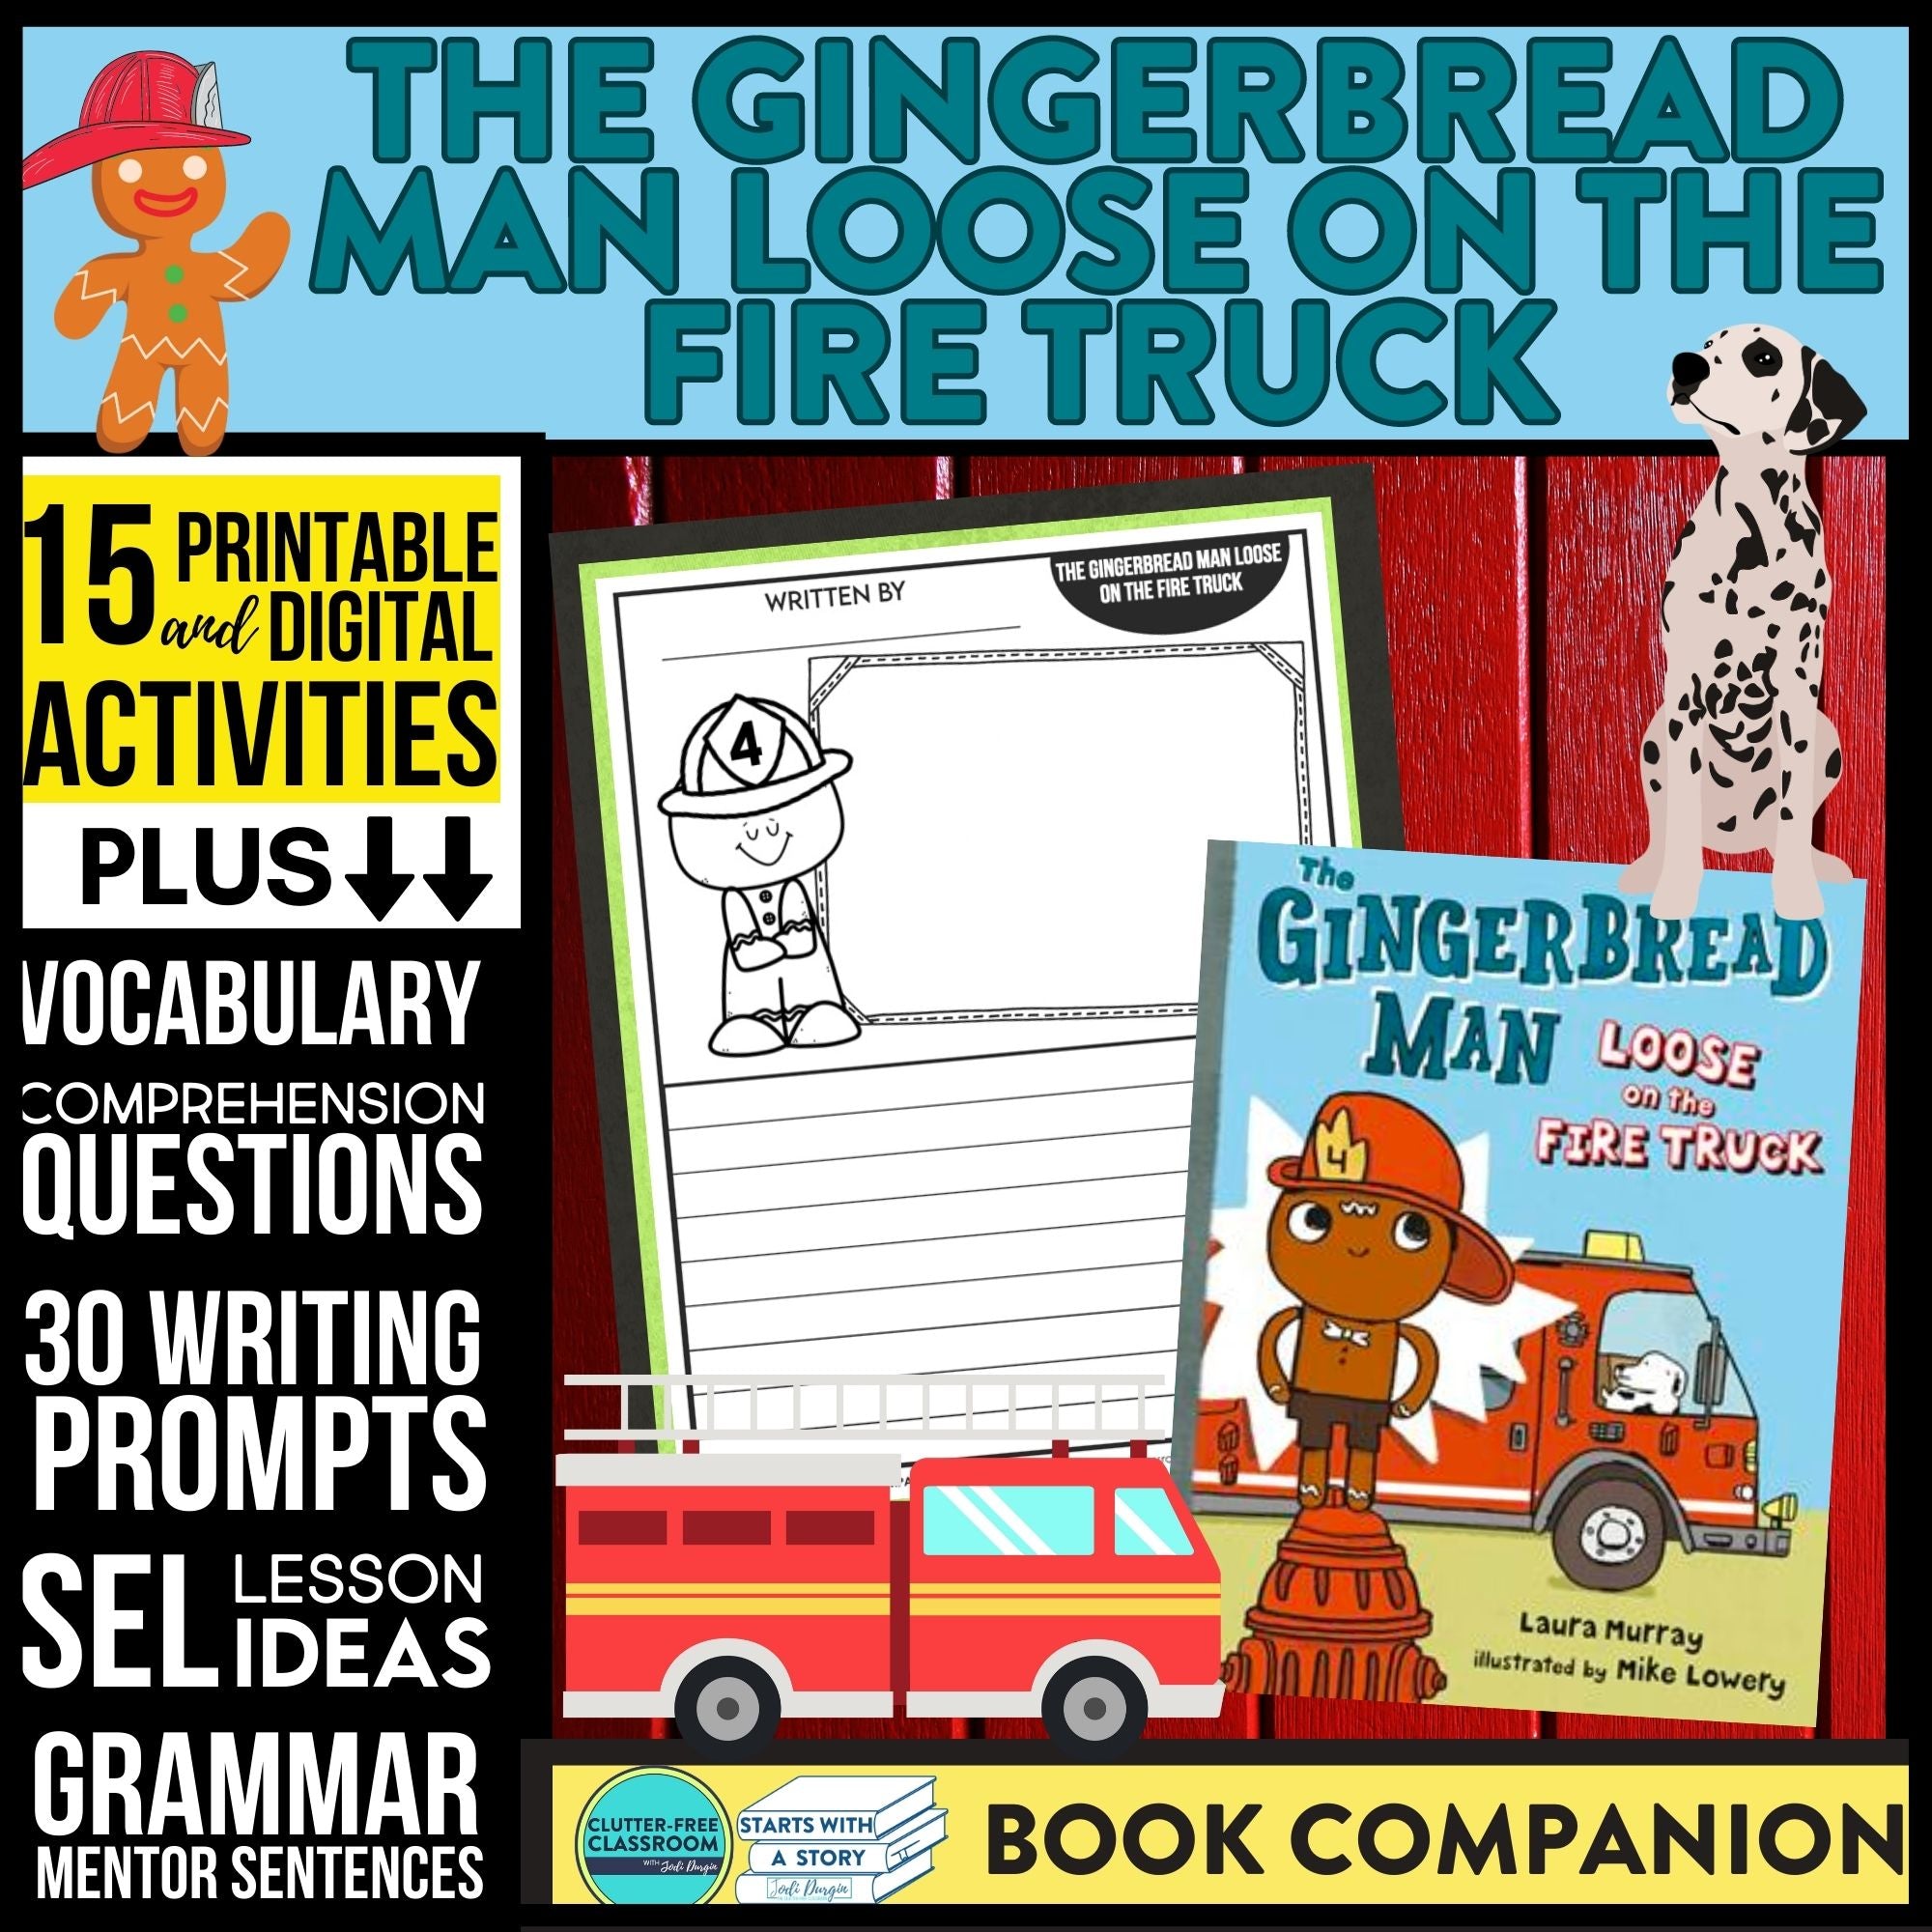 THE GINGERBREAD MAN LOOSE ON THE FIRE TRUCK activities and lesson plan ideas